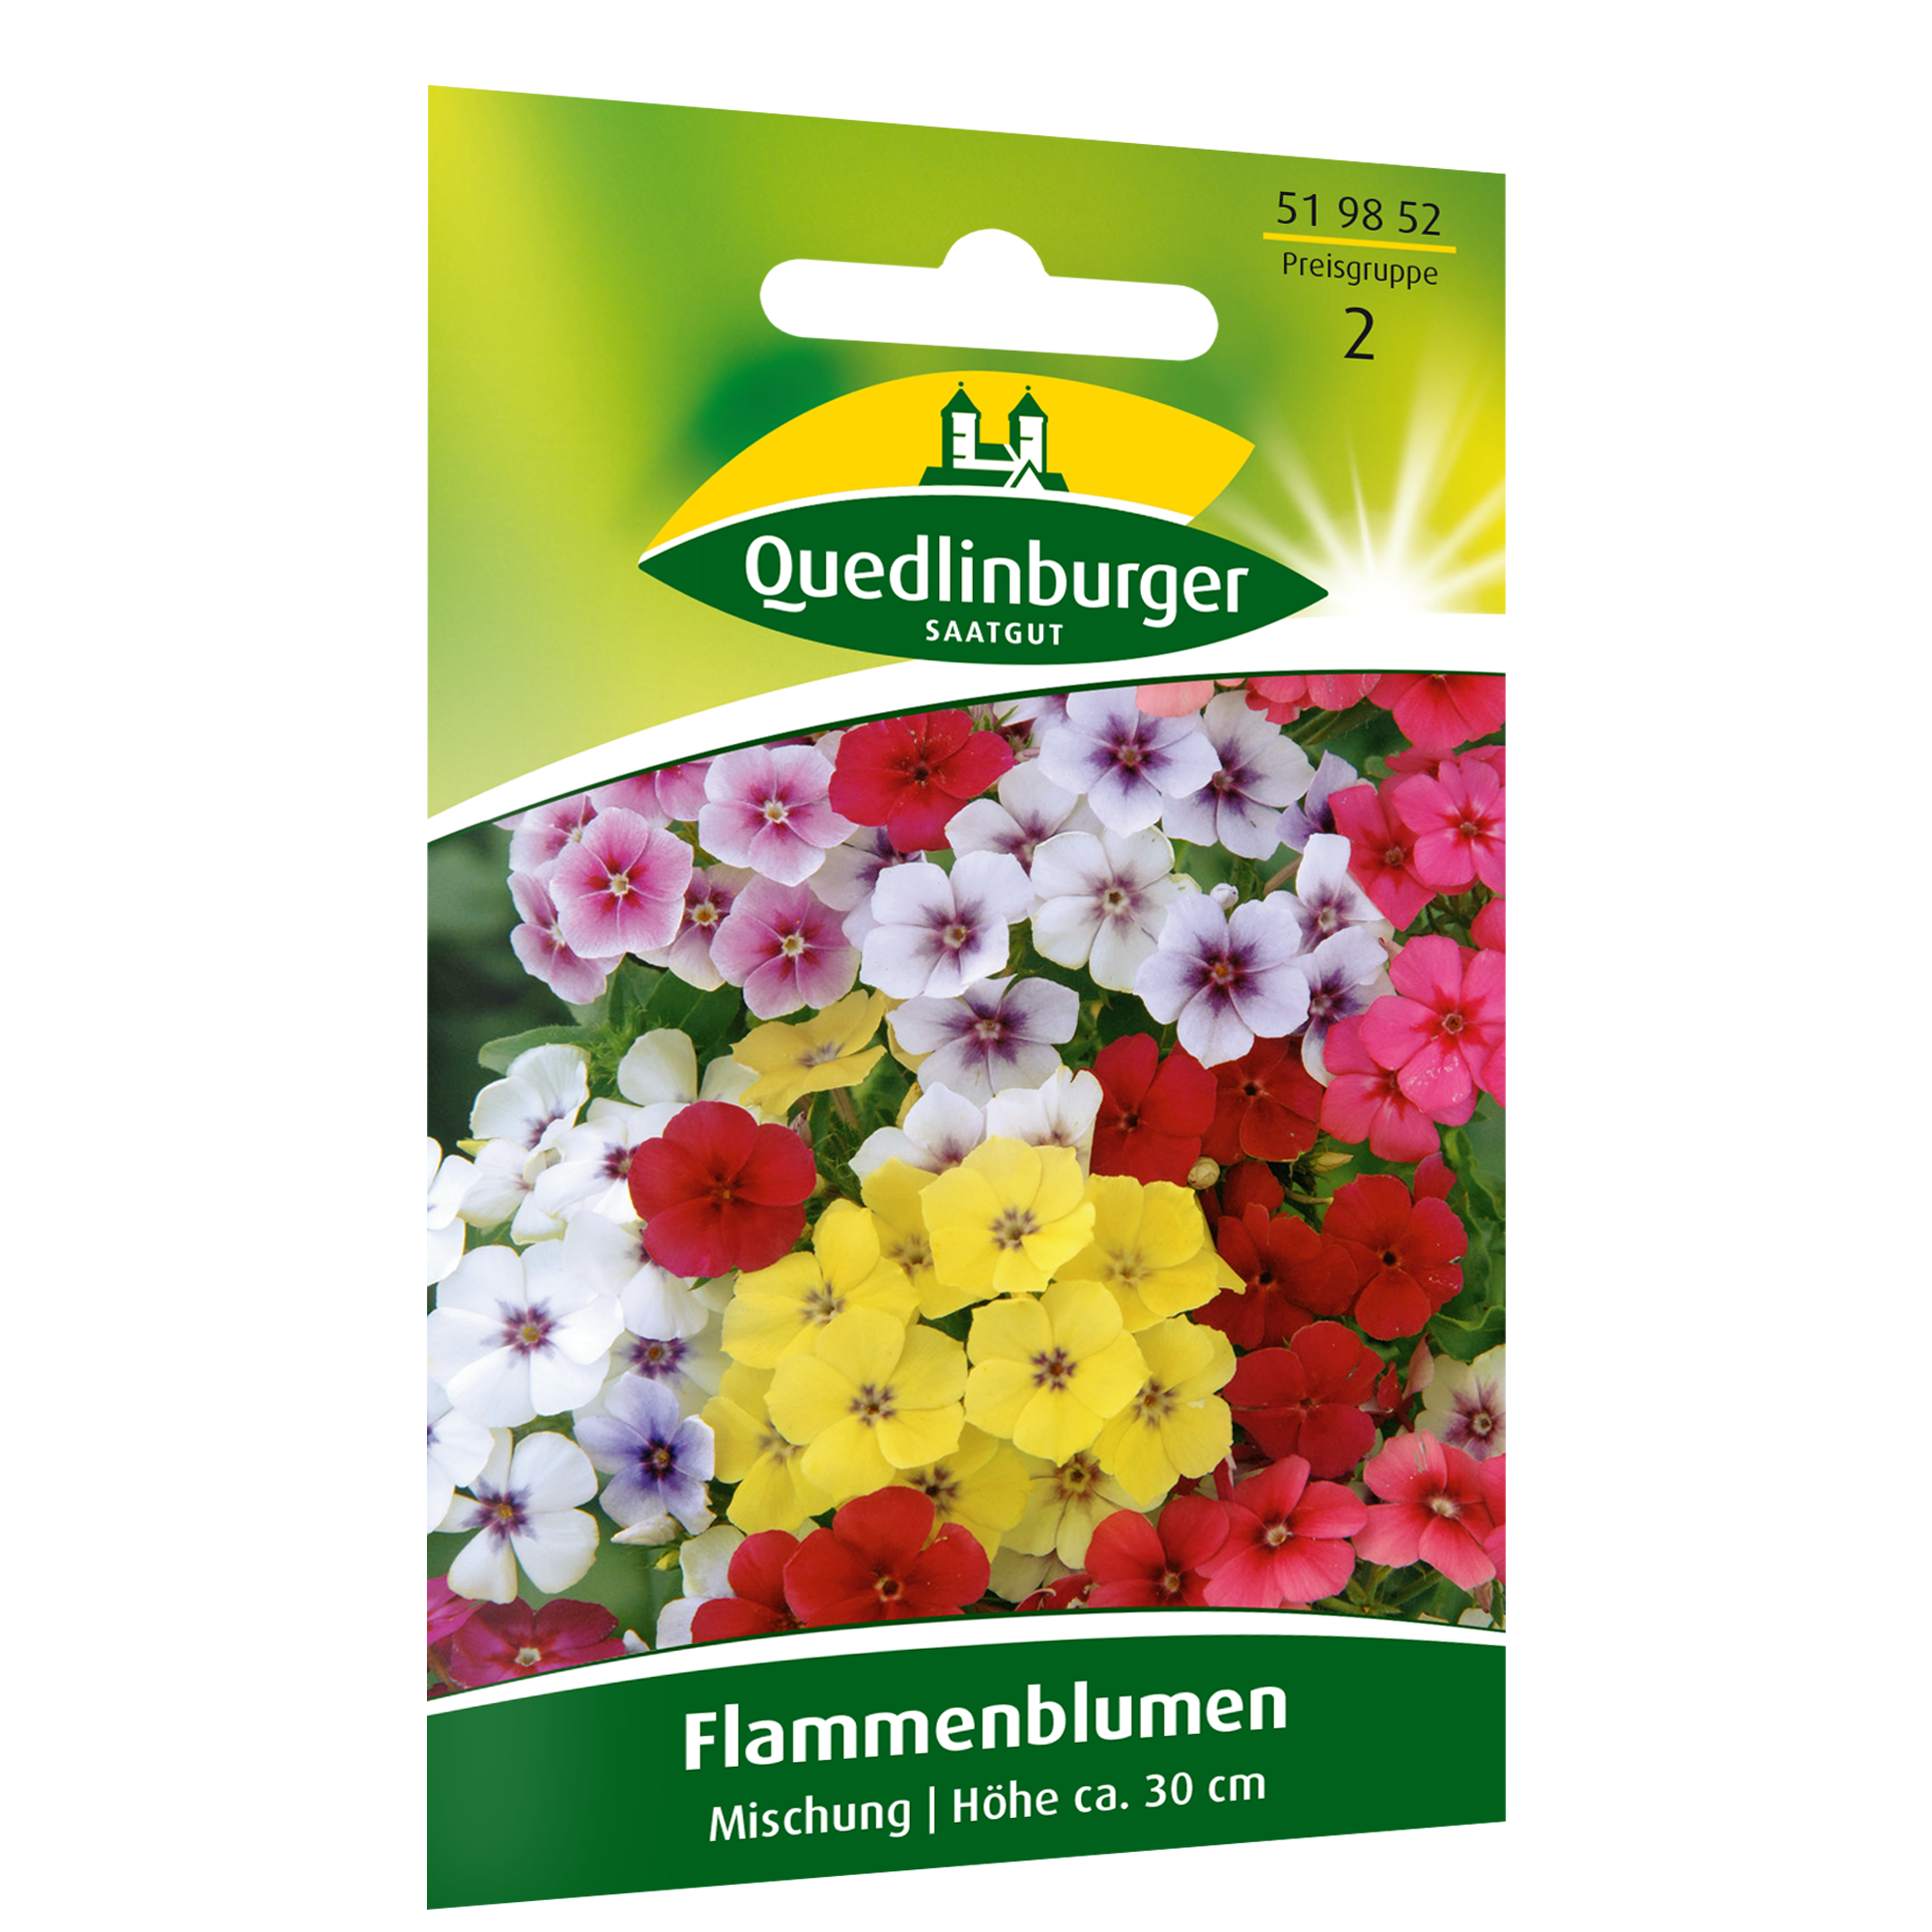 Flammenblumen Mischung + product picture